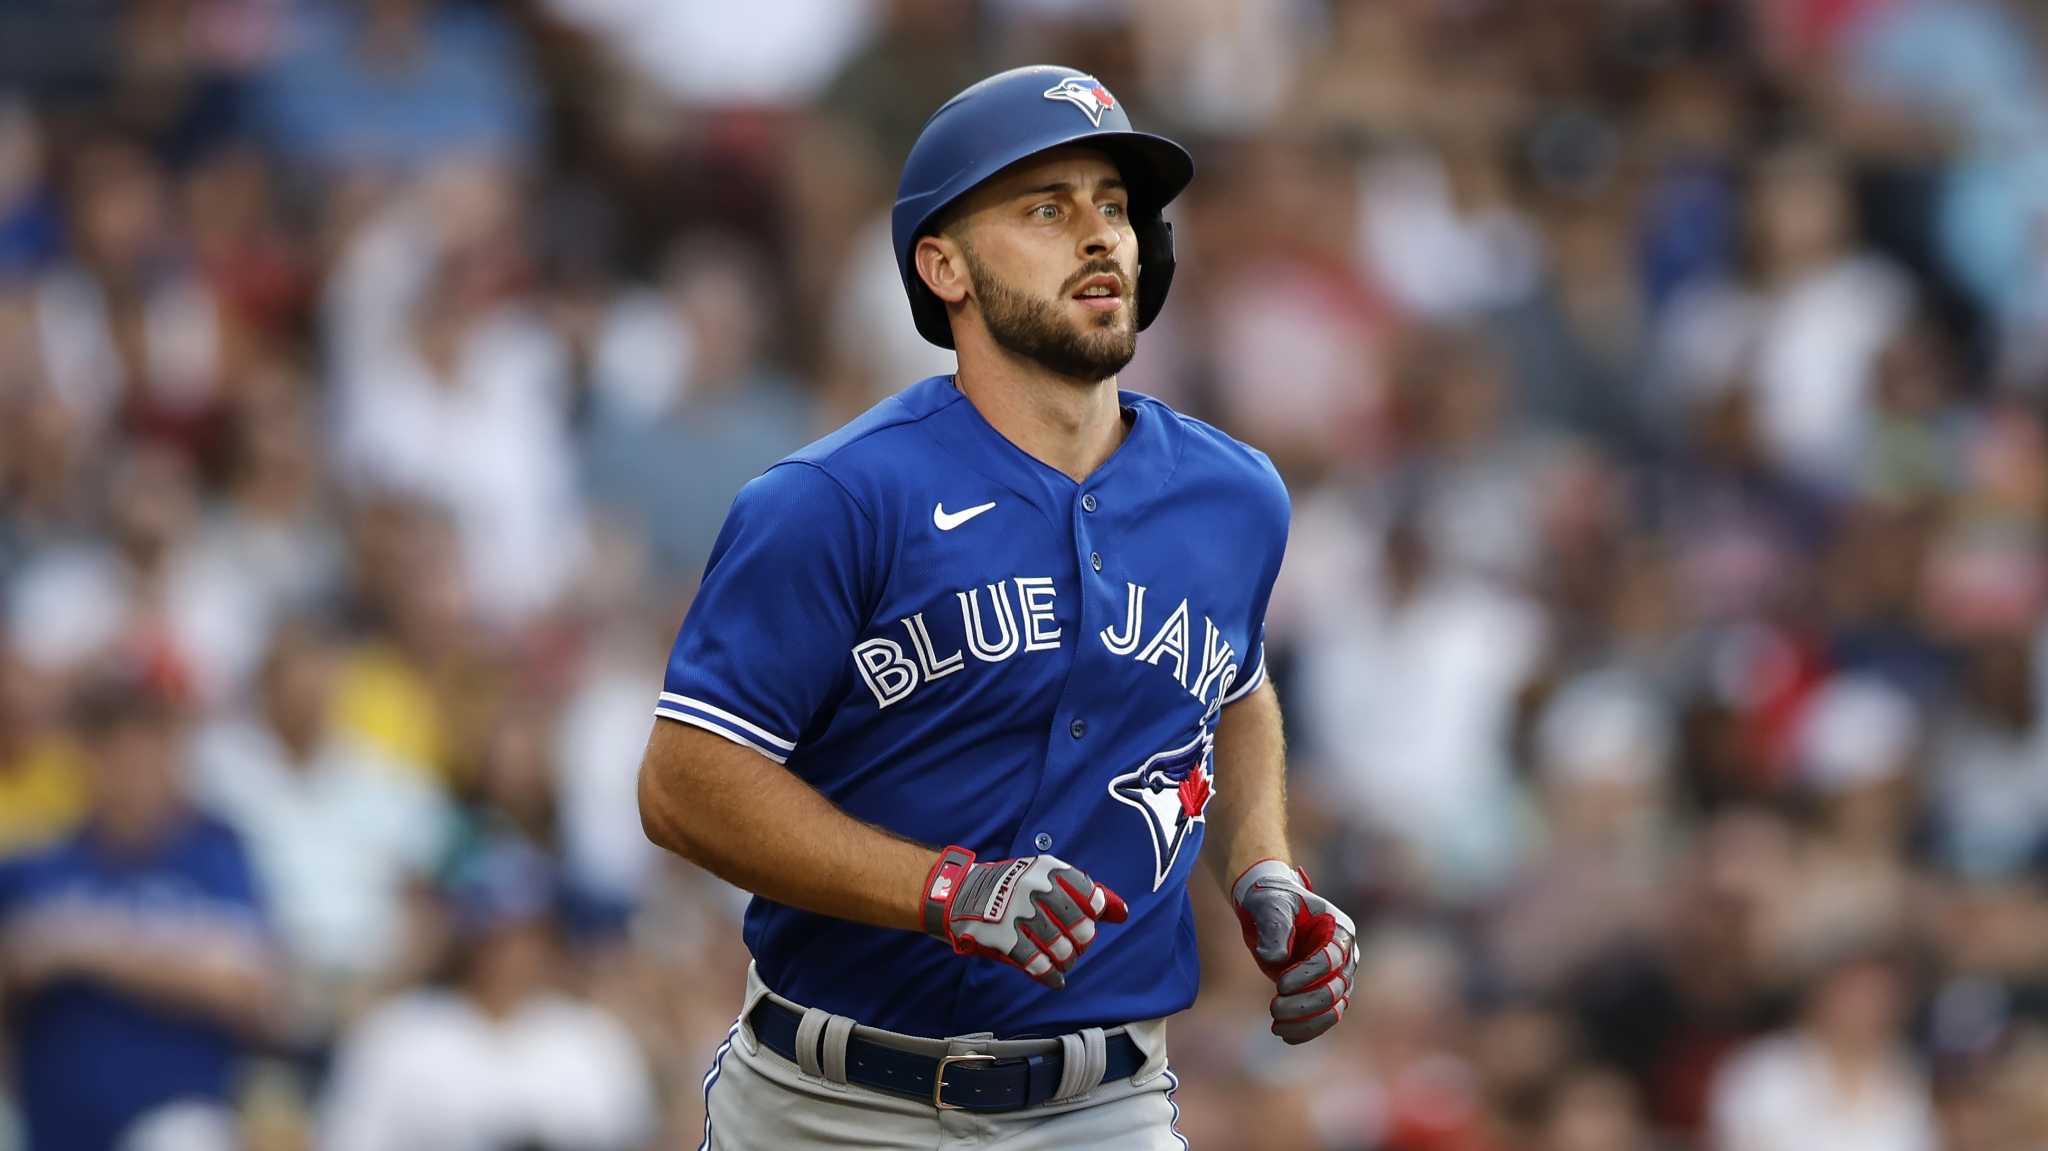 DeJong takes over shortstop as Blue Jays all-star Bichette put on